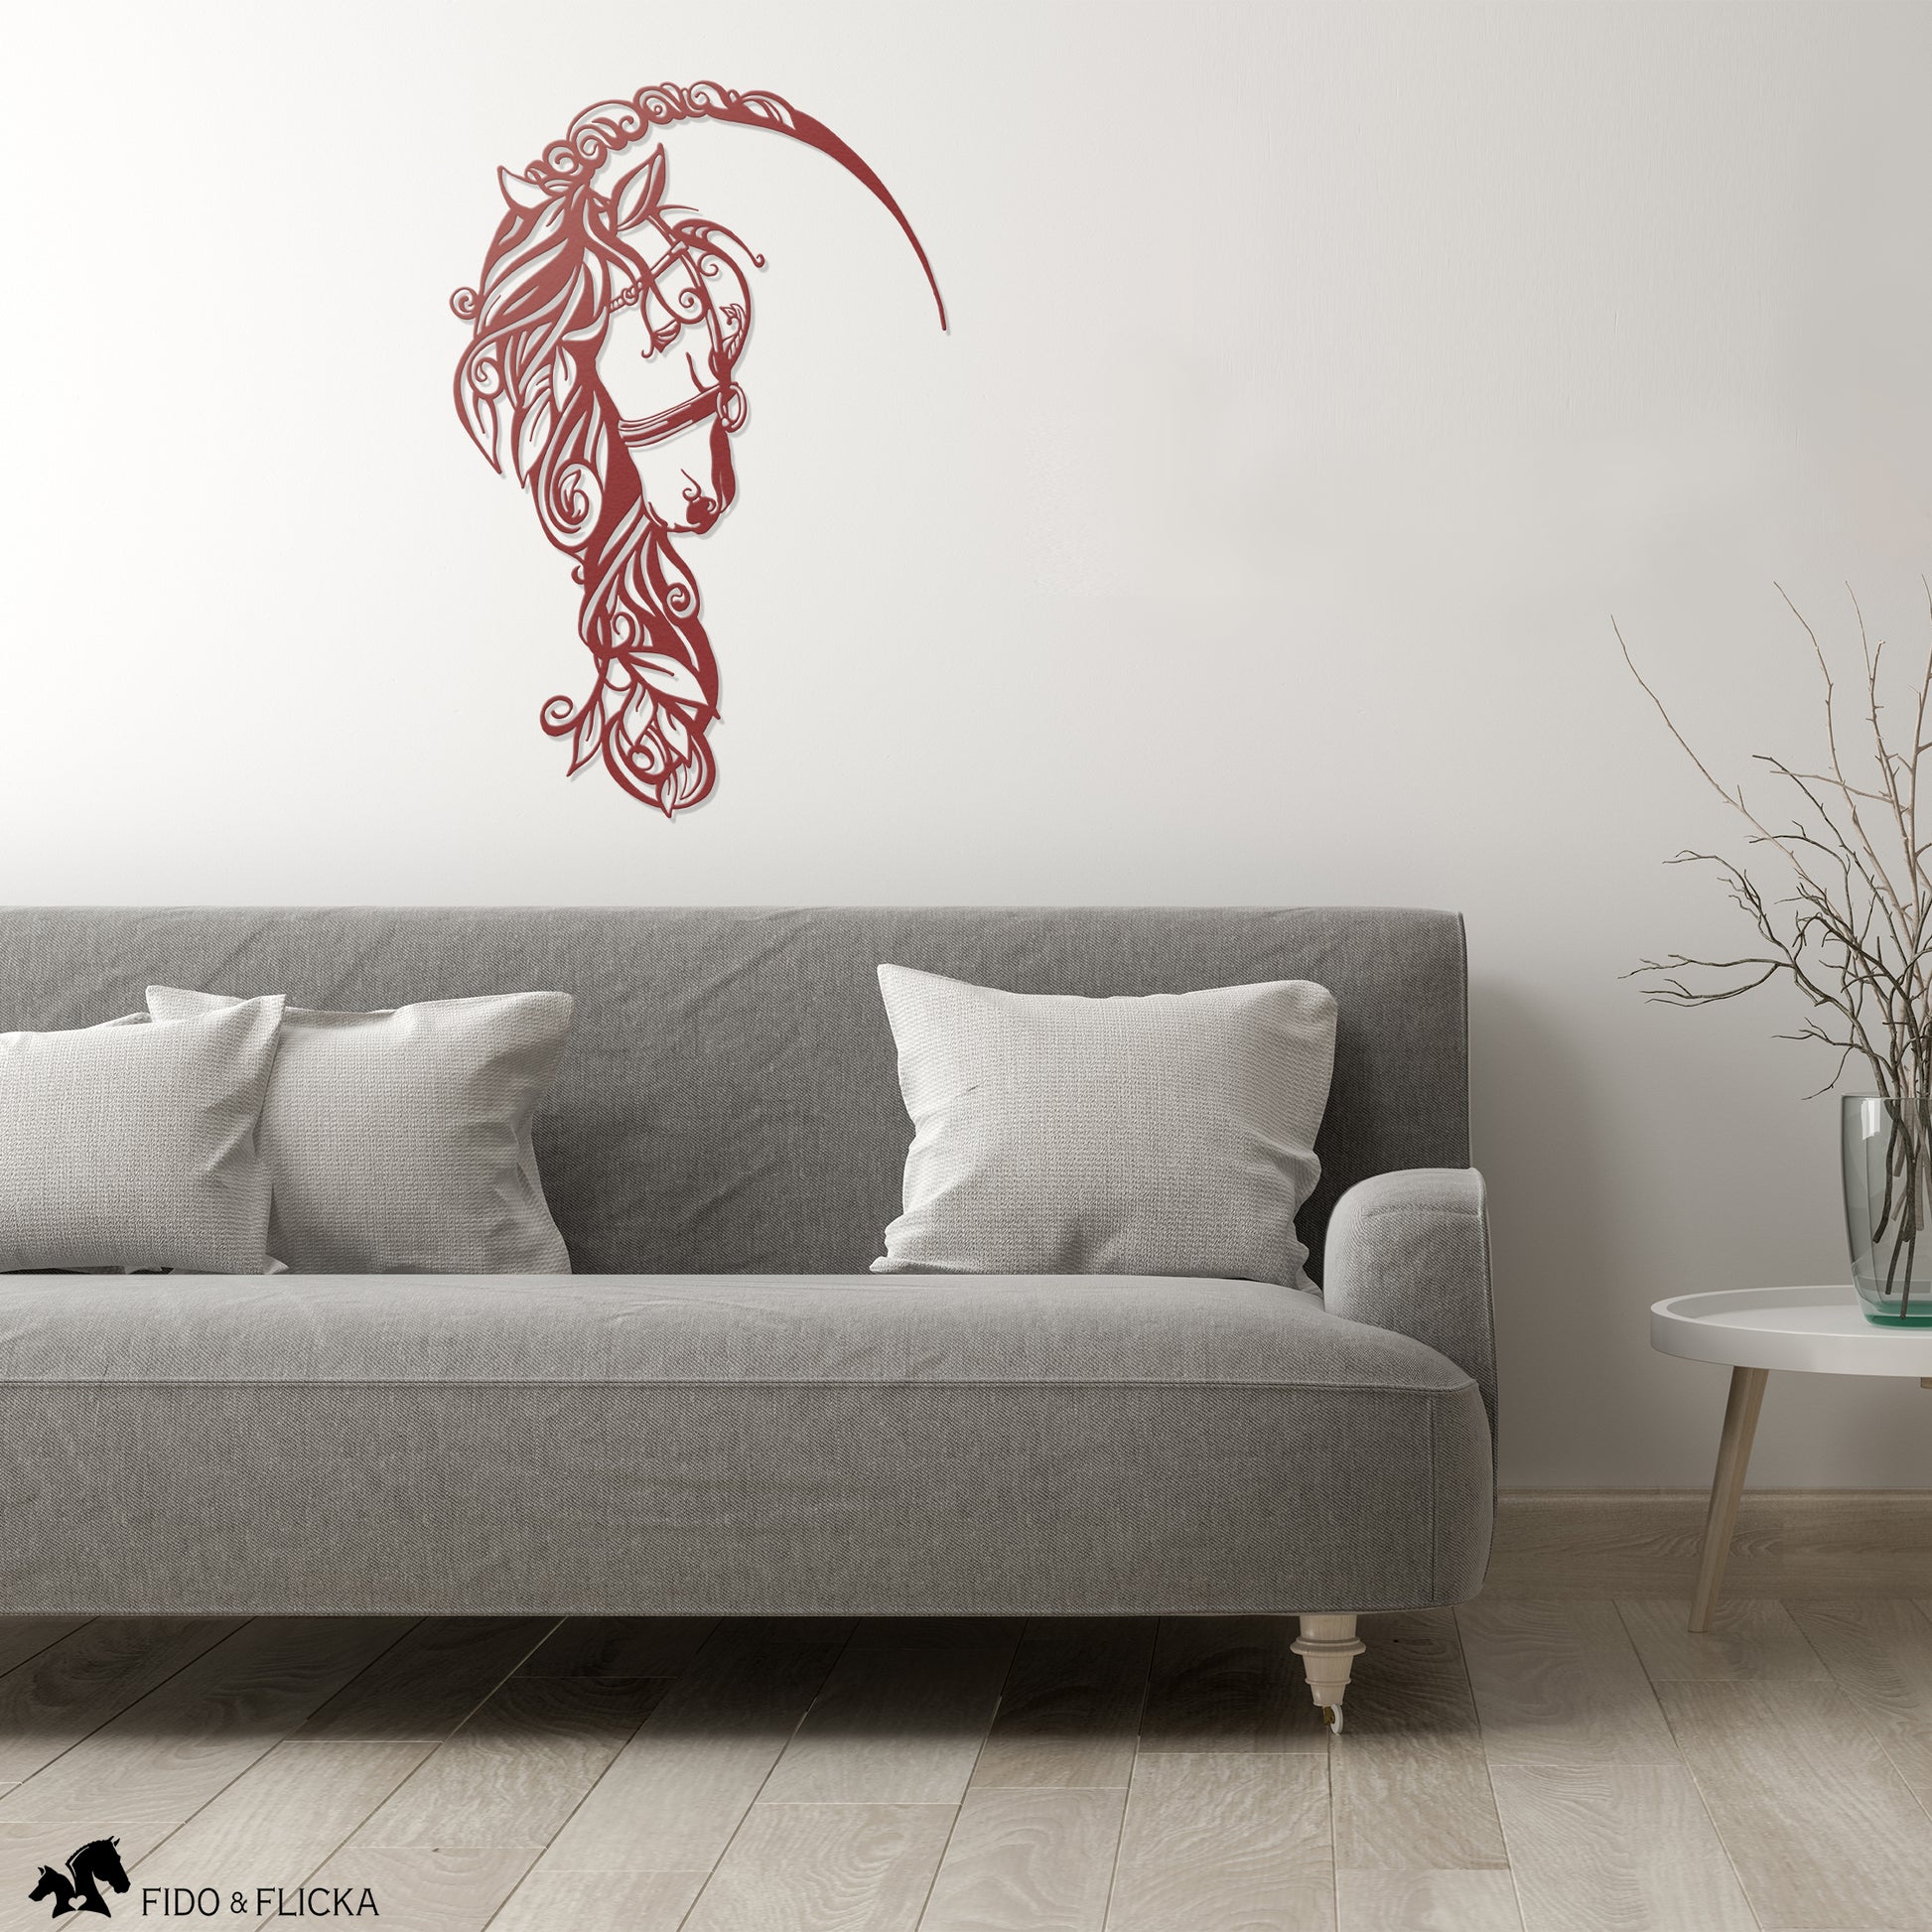 Red metal horse head wall art decor in living room